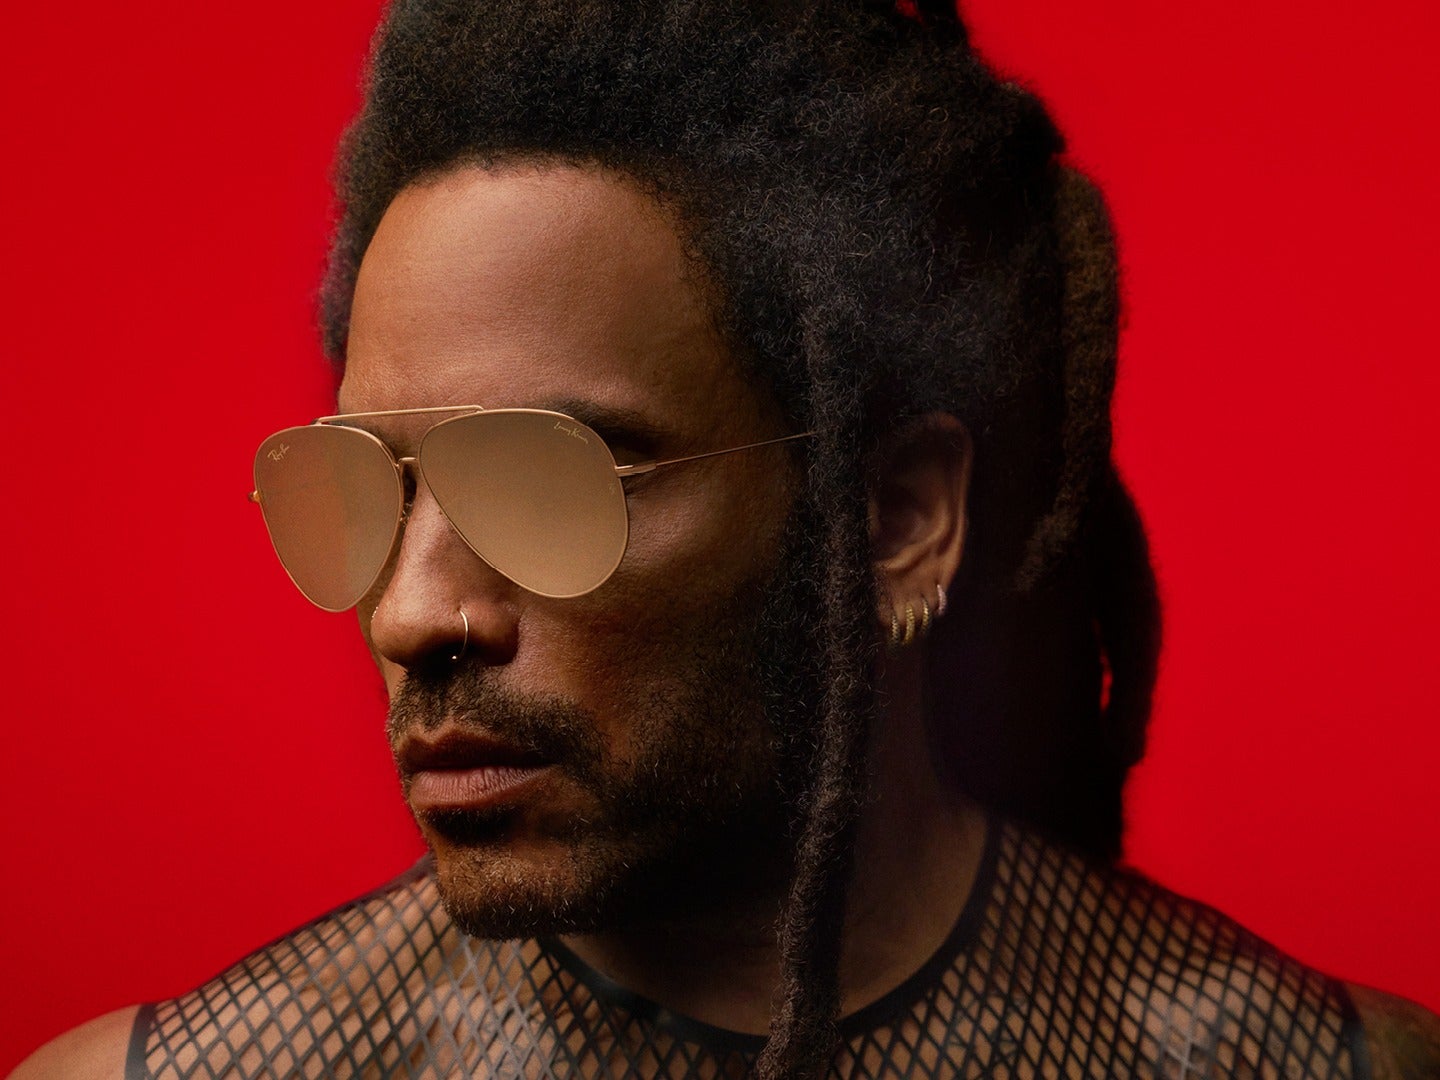 Ray-Ban Taps Lenny Kravitz For An Exclusive Capsule Collection